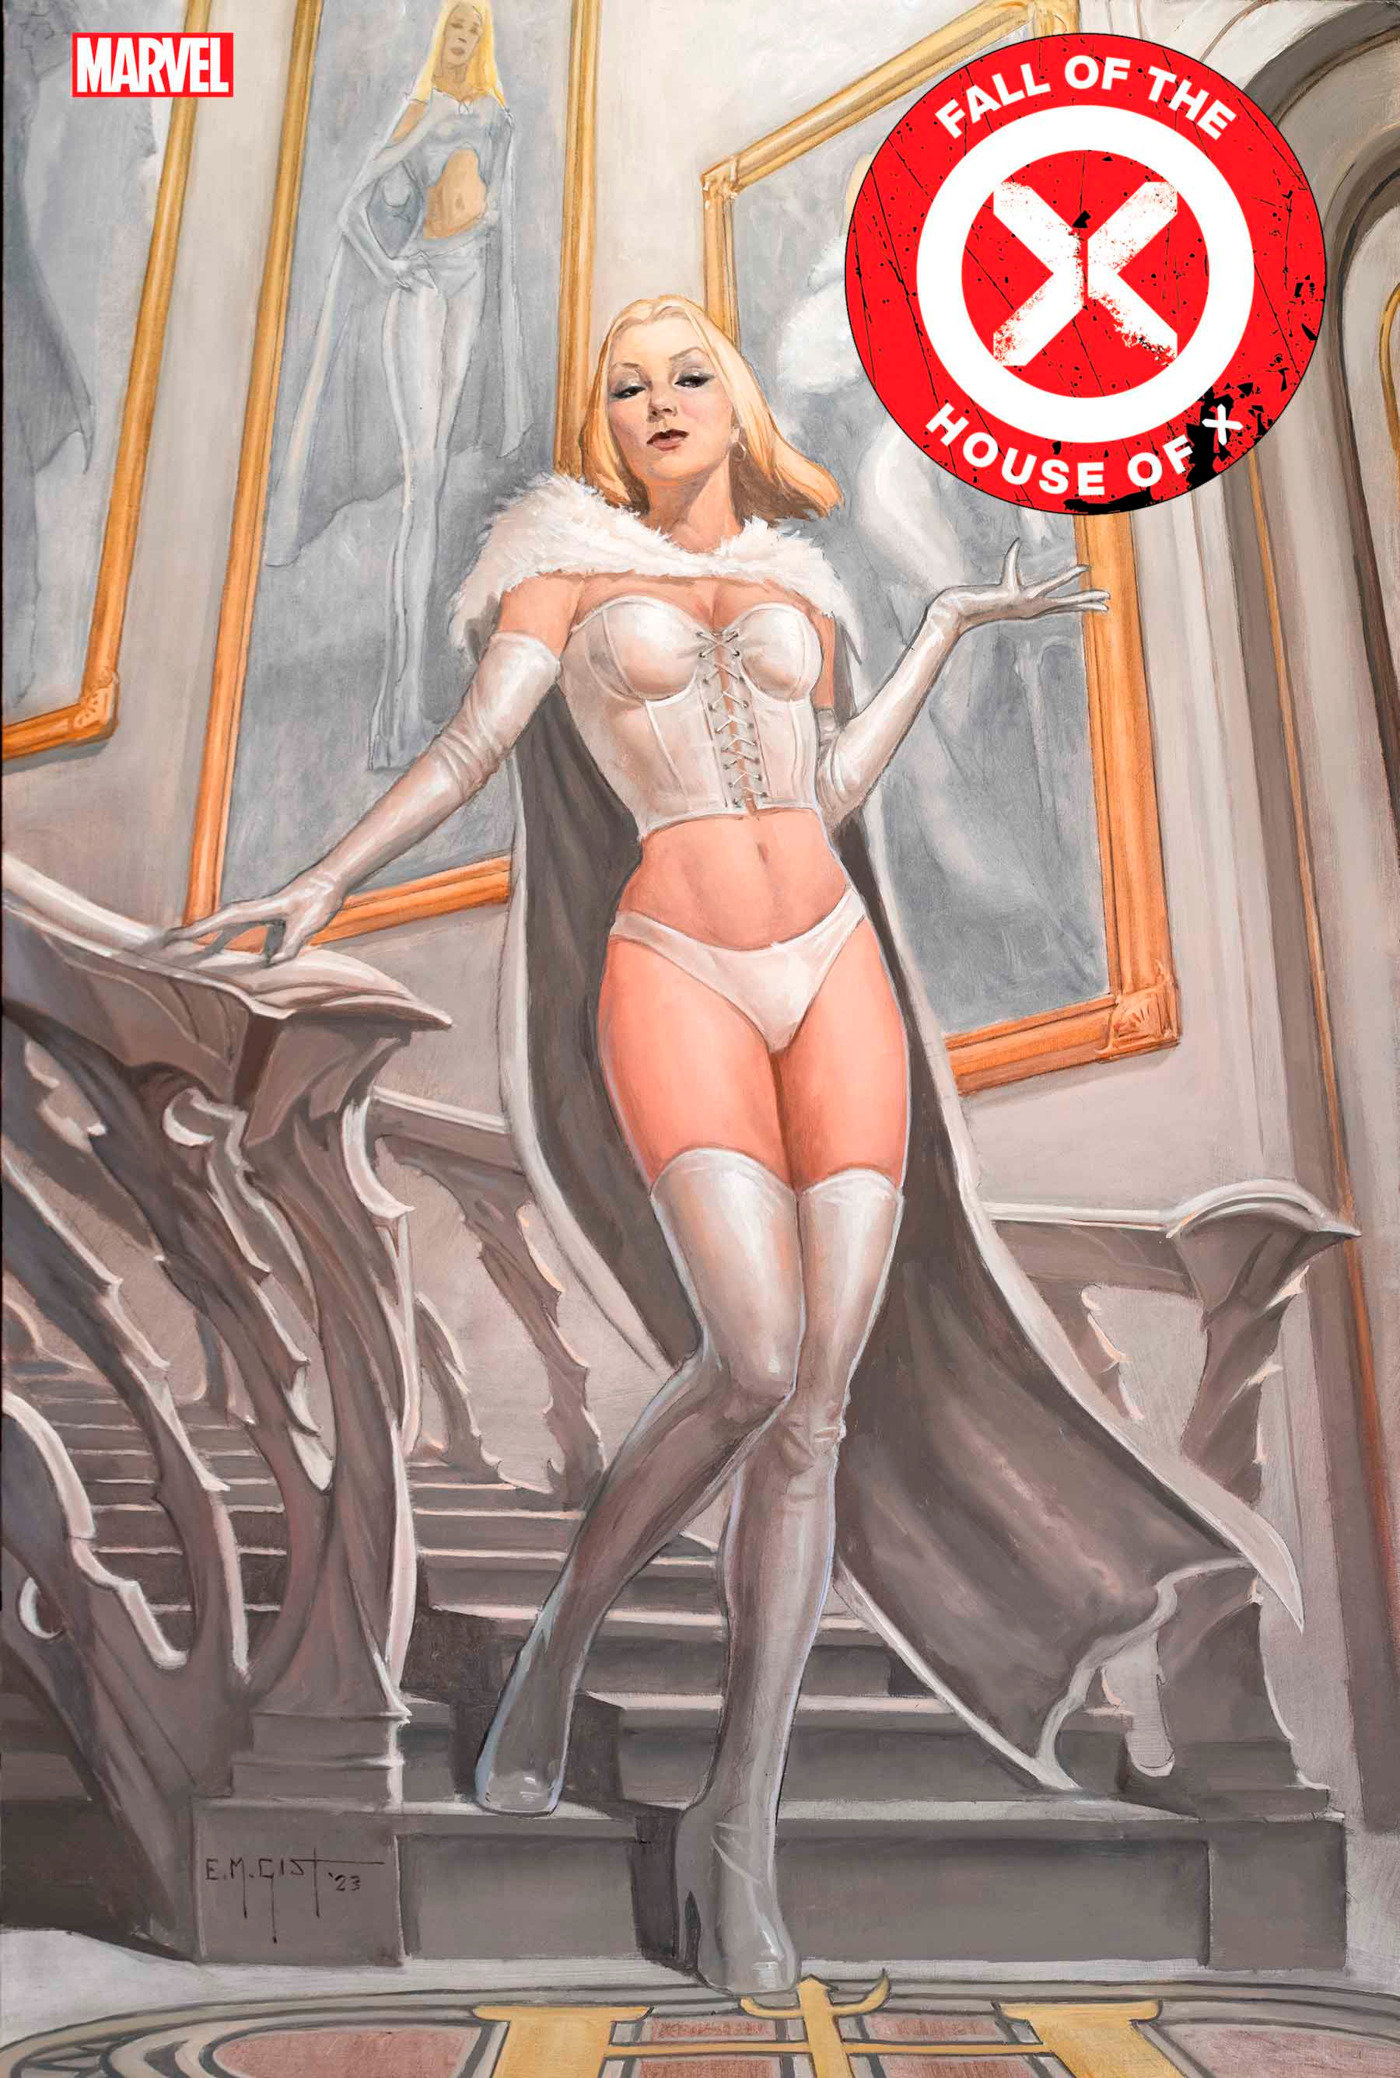 Fall of the House of X #4 E.M. Gist Emma Frost Variant (Fall of the House of X)